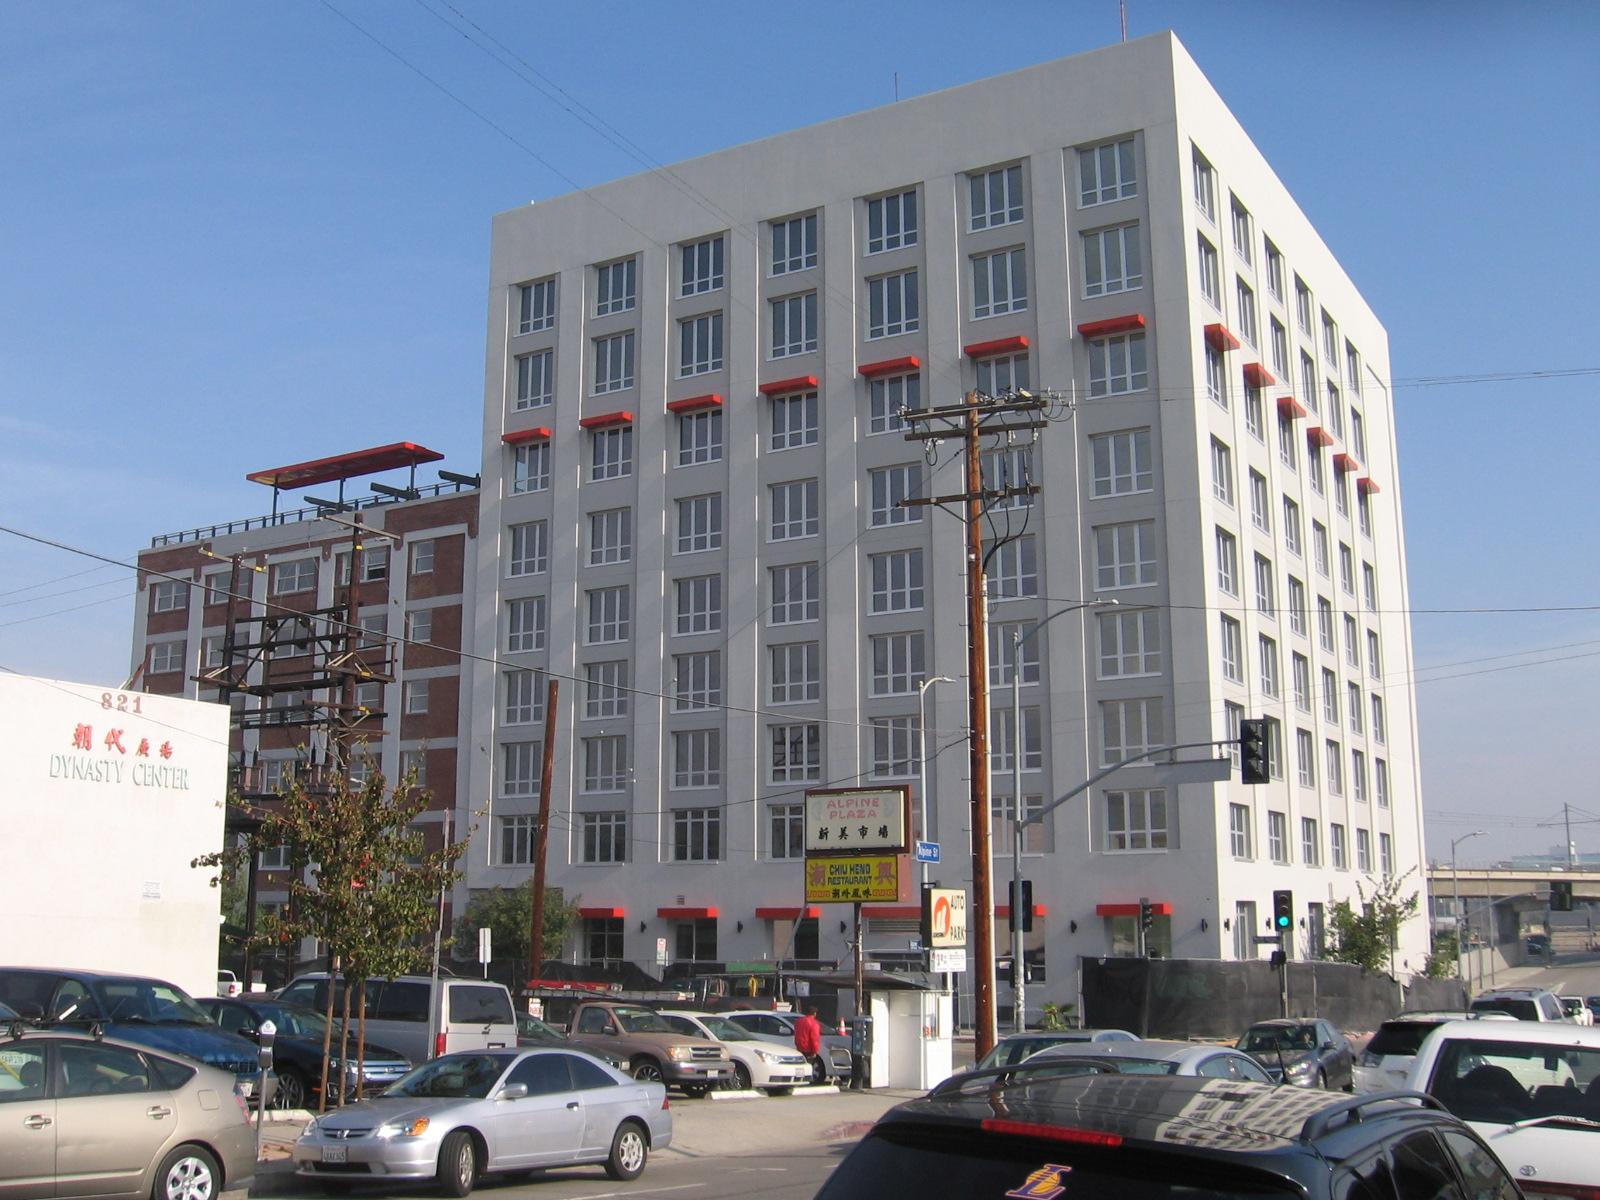 Street view of a tall eight story building in grey color. In addition of a five floor brown building on the right